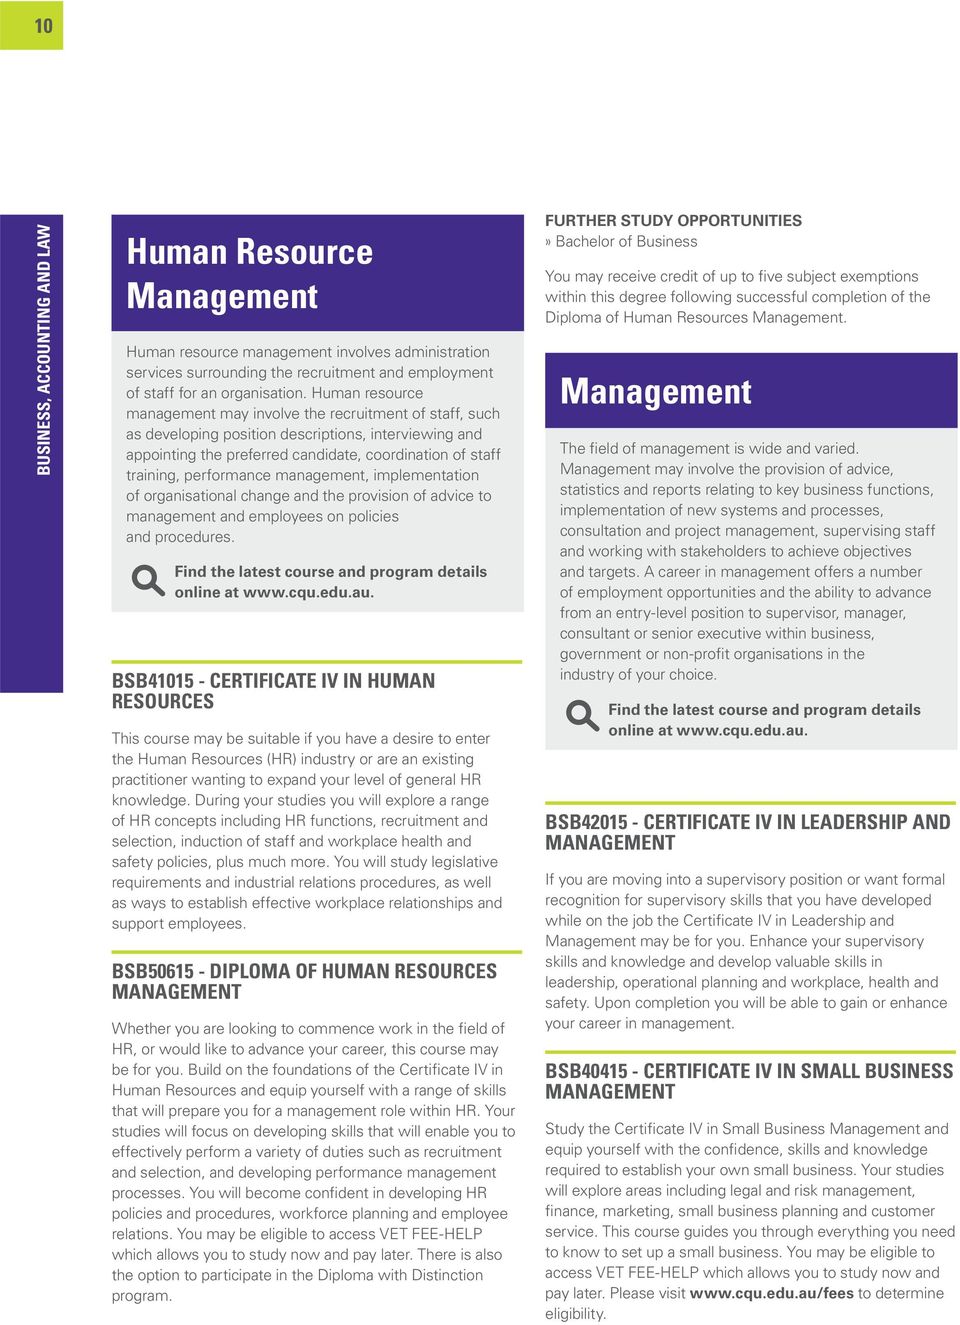 performance management, implementation of organisational change and the provision of advice to management and employees on policies and procedures.